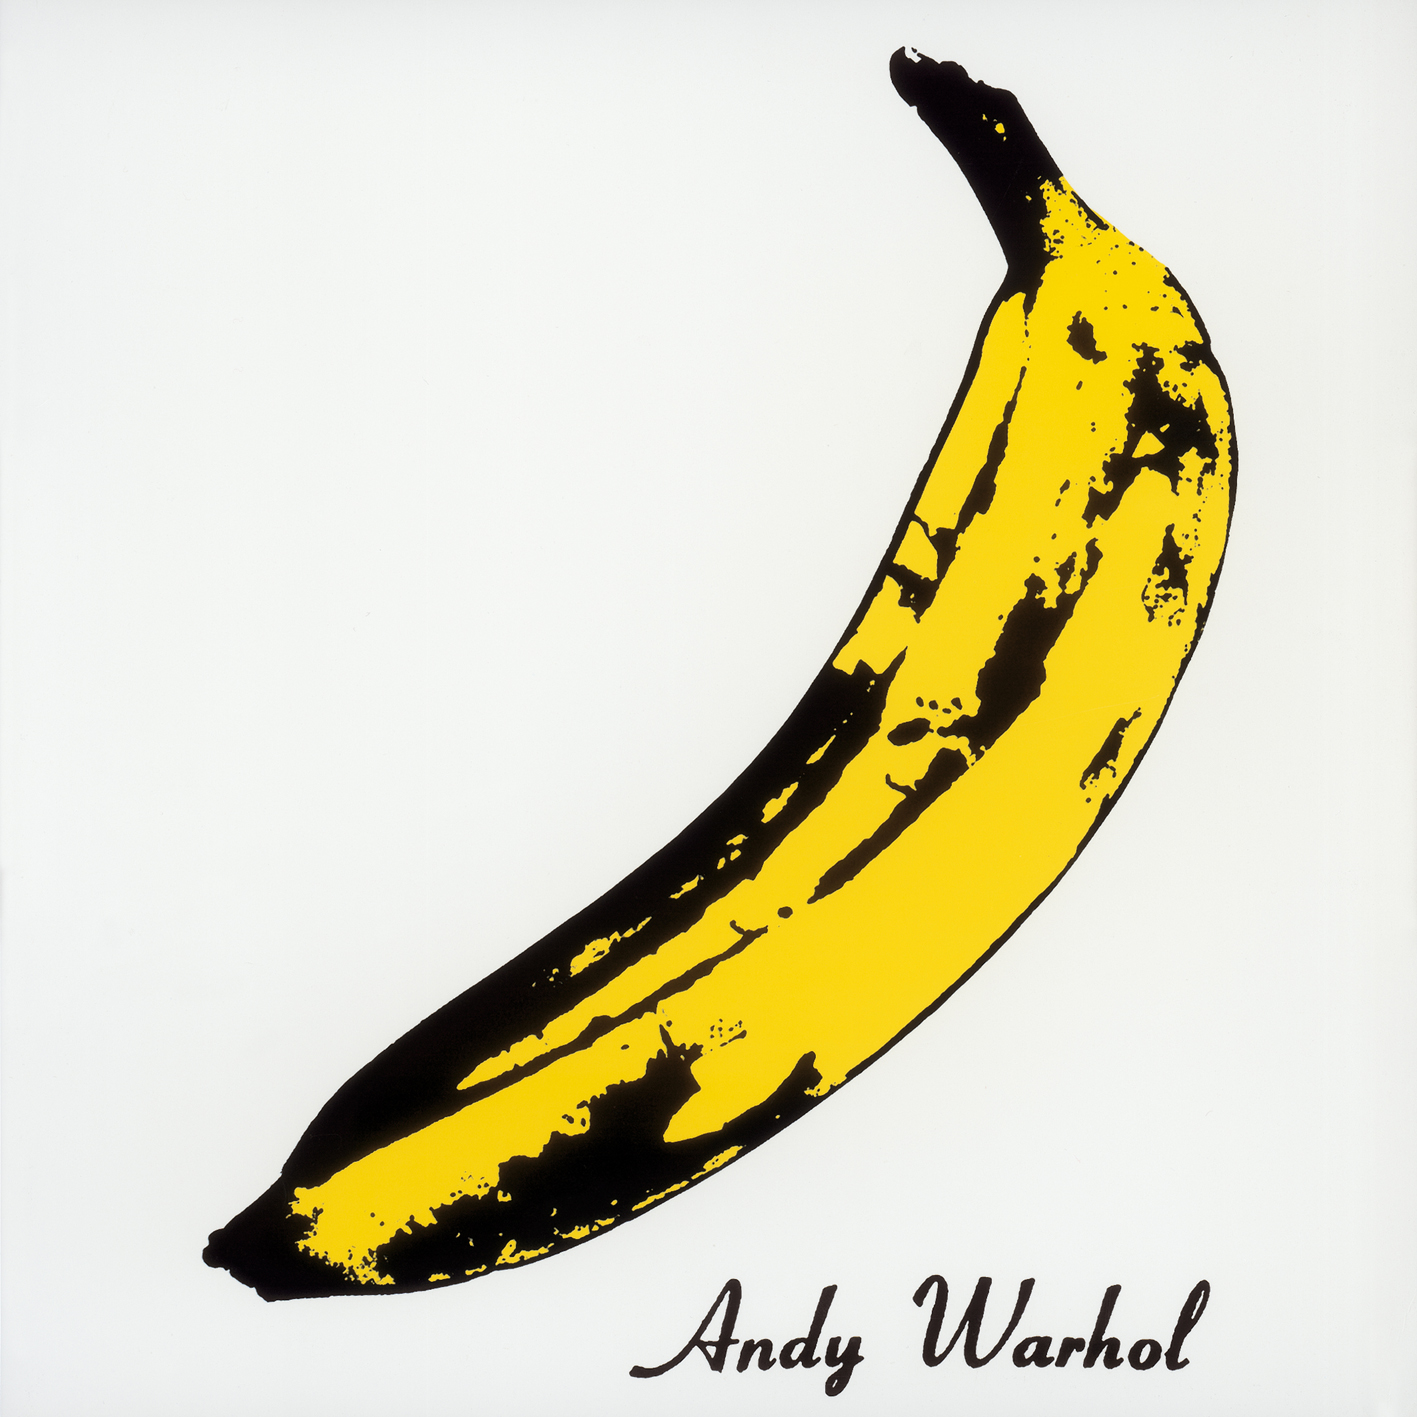 10 Album Covers Designed by Andy Warhol | Complex